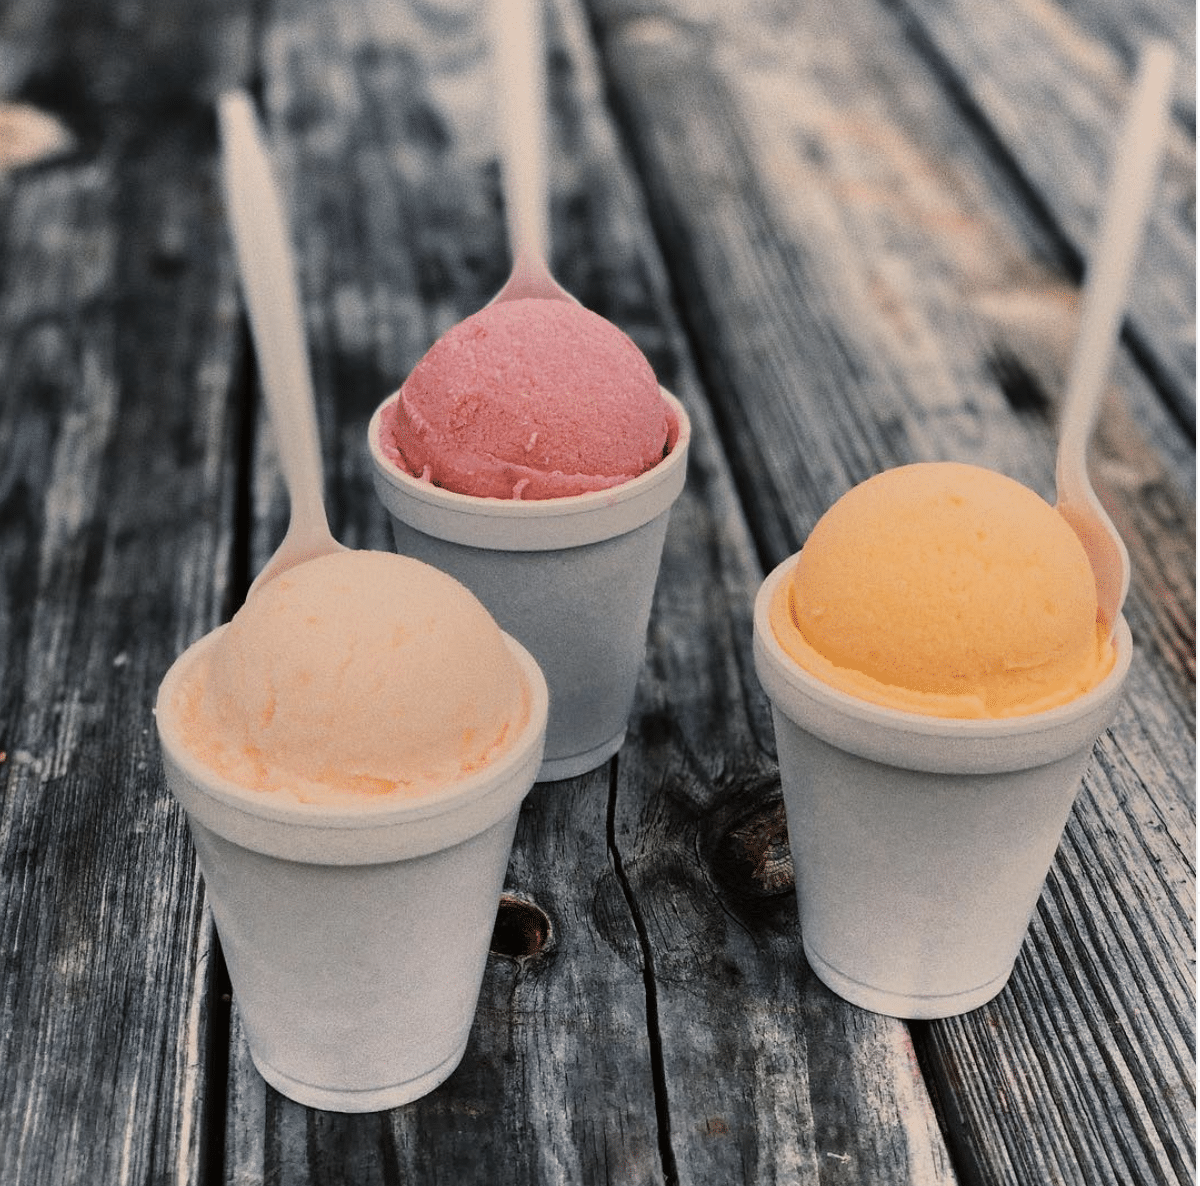 Doodles Bham Need a cooldown? Here are 8 spots to get shaved ice + popsicles in Birmingham